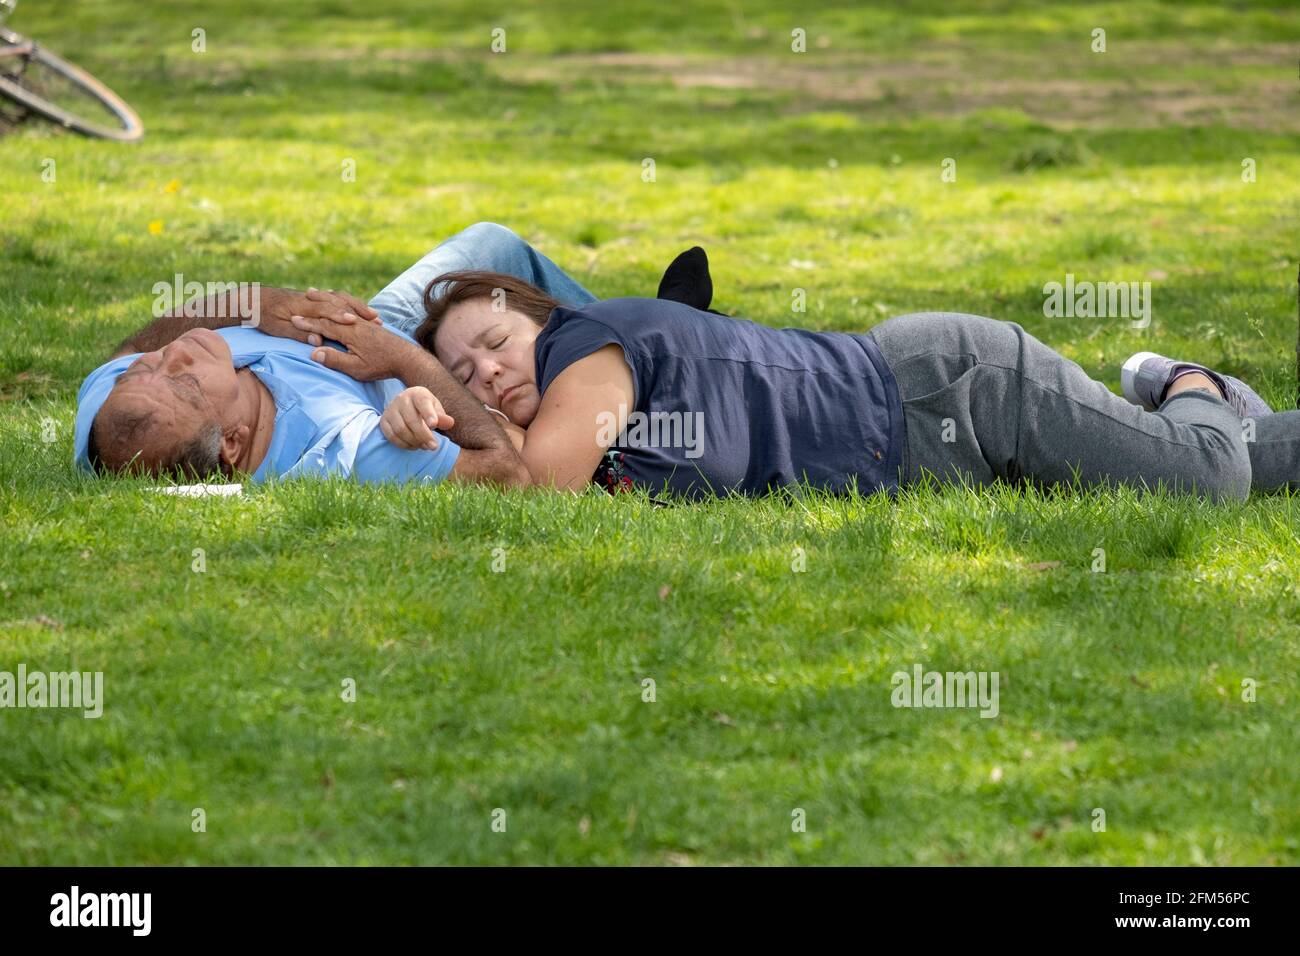 A couple, presumably husband & wife, take an afternoon nap in Flushing Meadows Corona Park in Queens, New York City. Stock Photo